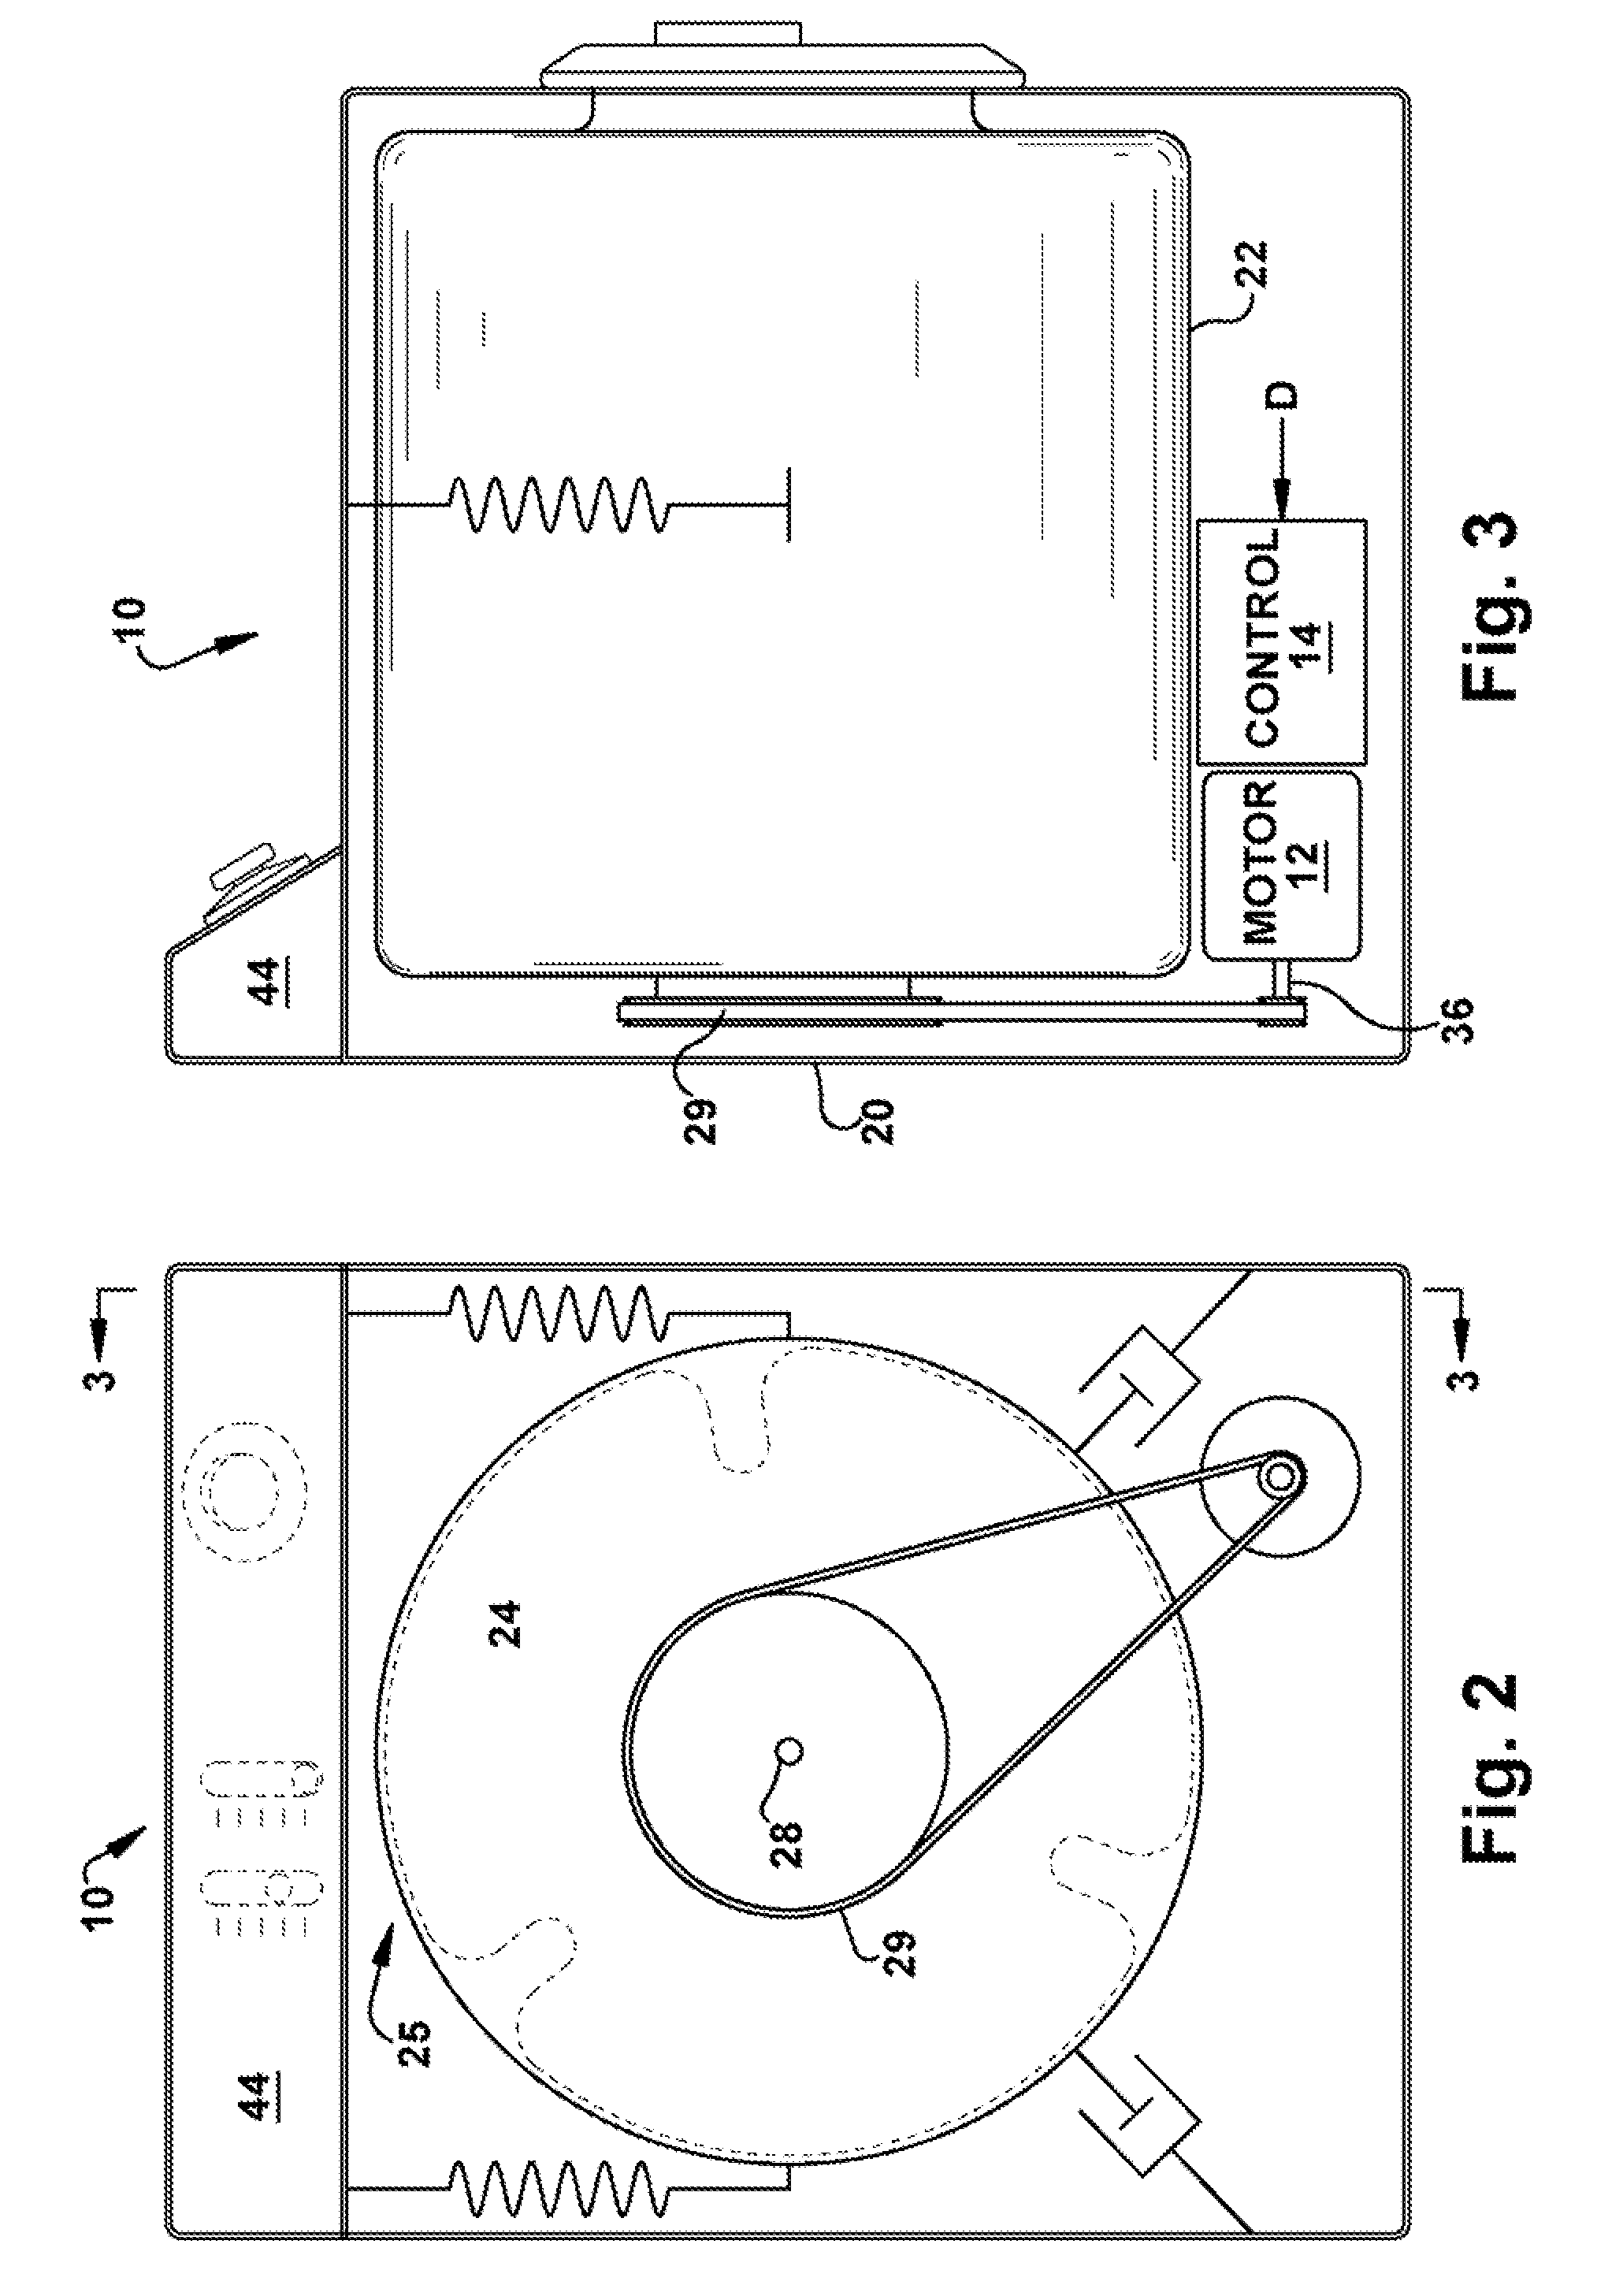 Load size measuring apparatus and method